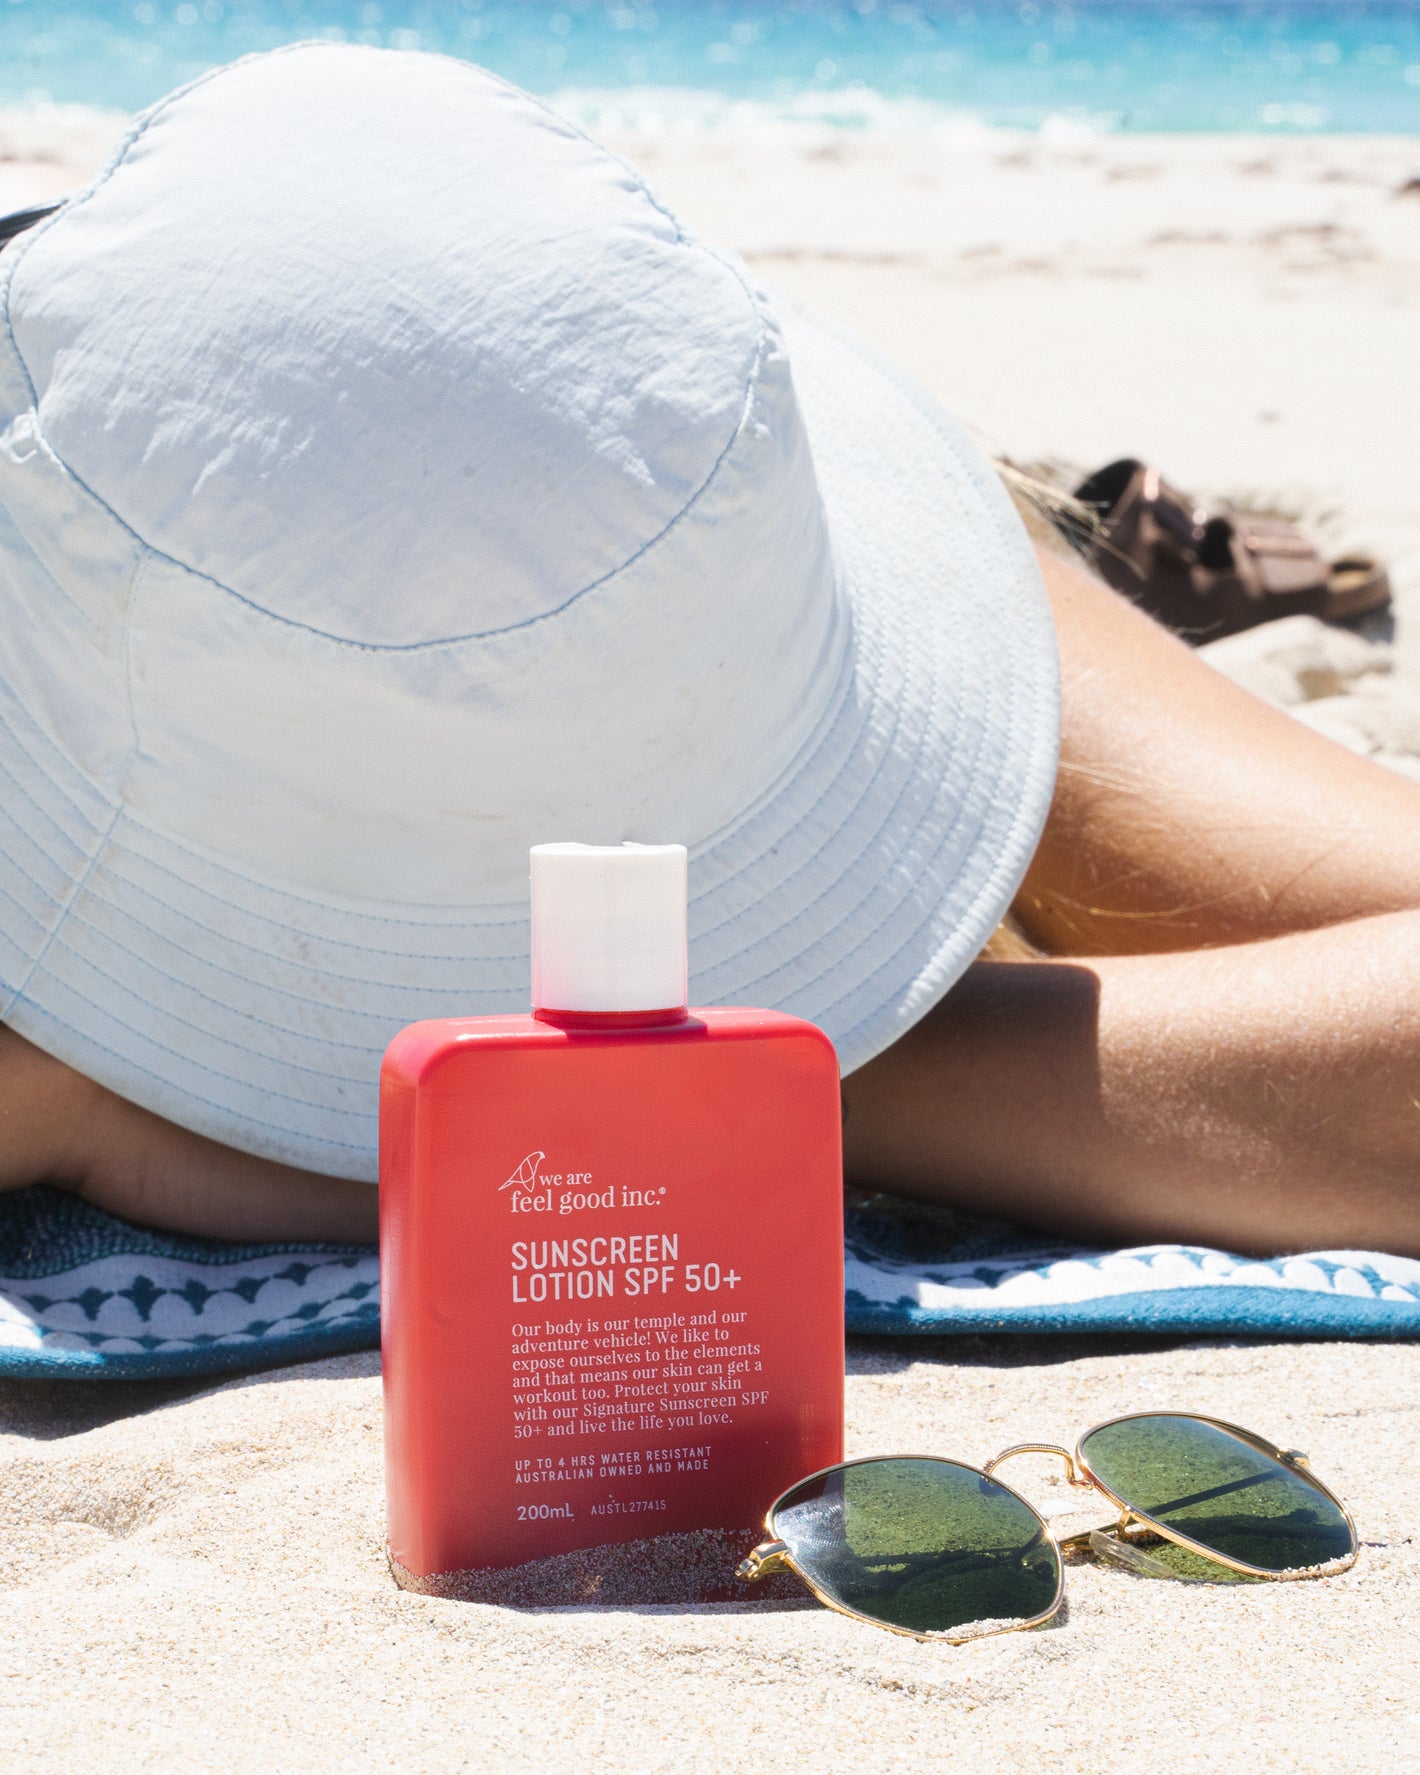 A person lying on the sand wearing a wide-brimmed white hat and sunglasses beside them. In the foreground is a red bottle of 'We Are Feel Good Inc. Signature Sunscreen Lotion SPF 50+' on the sand